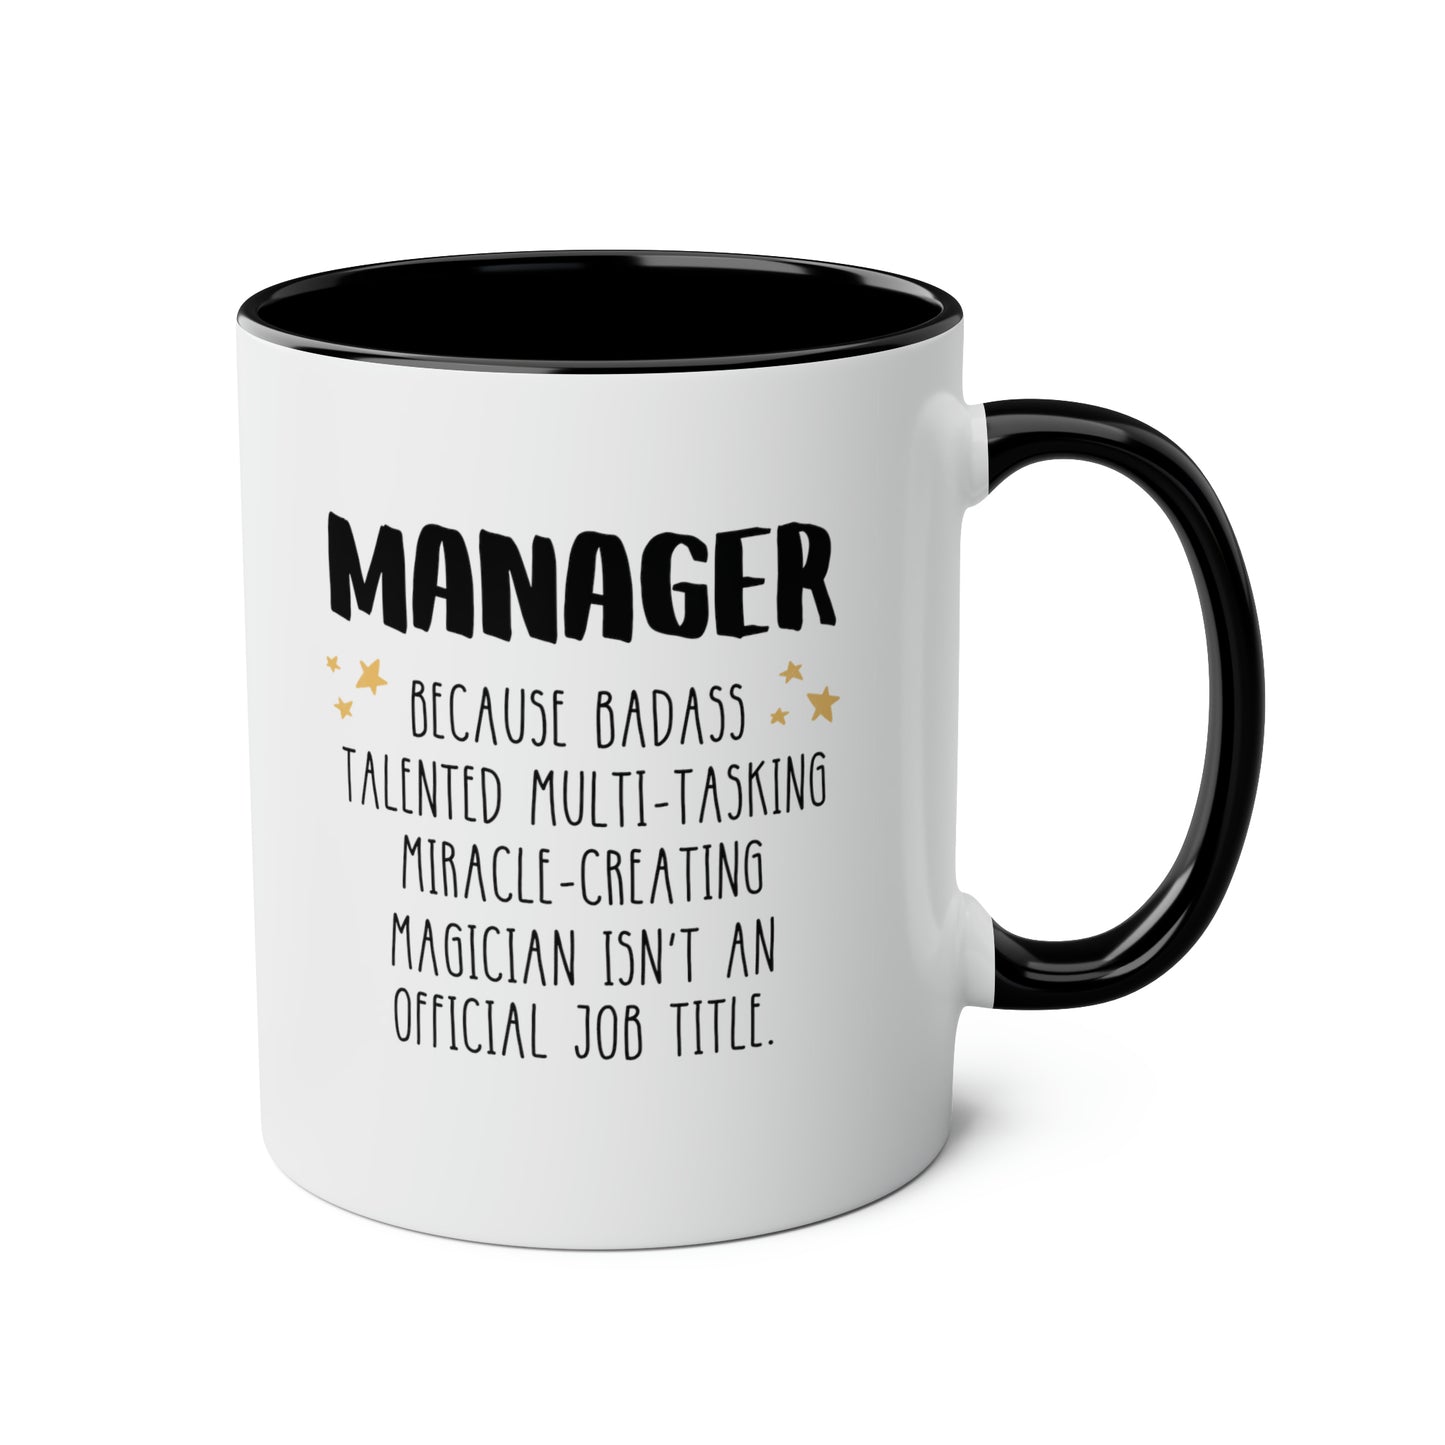 Manager Because Badass Talented Multi-tasking Miracle-creating Magician Isnt An Official Job Title 15oz white with black accent funny large coffee mug waveywares wavey wares wavywares wavy wares